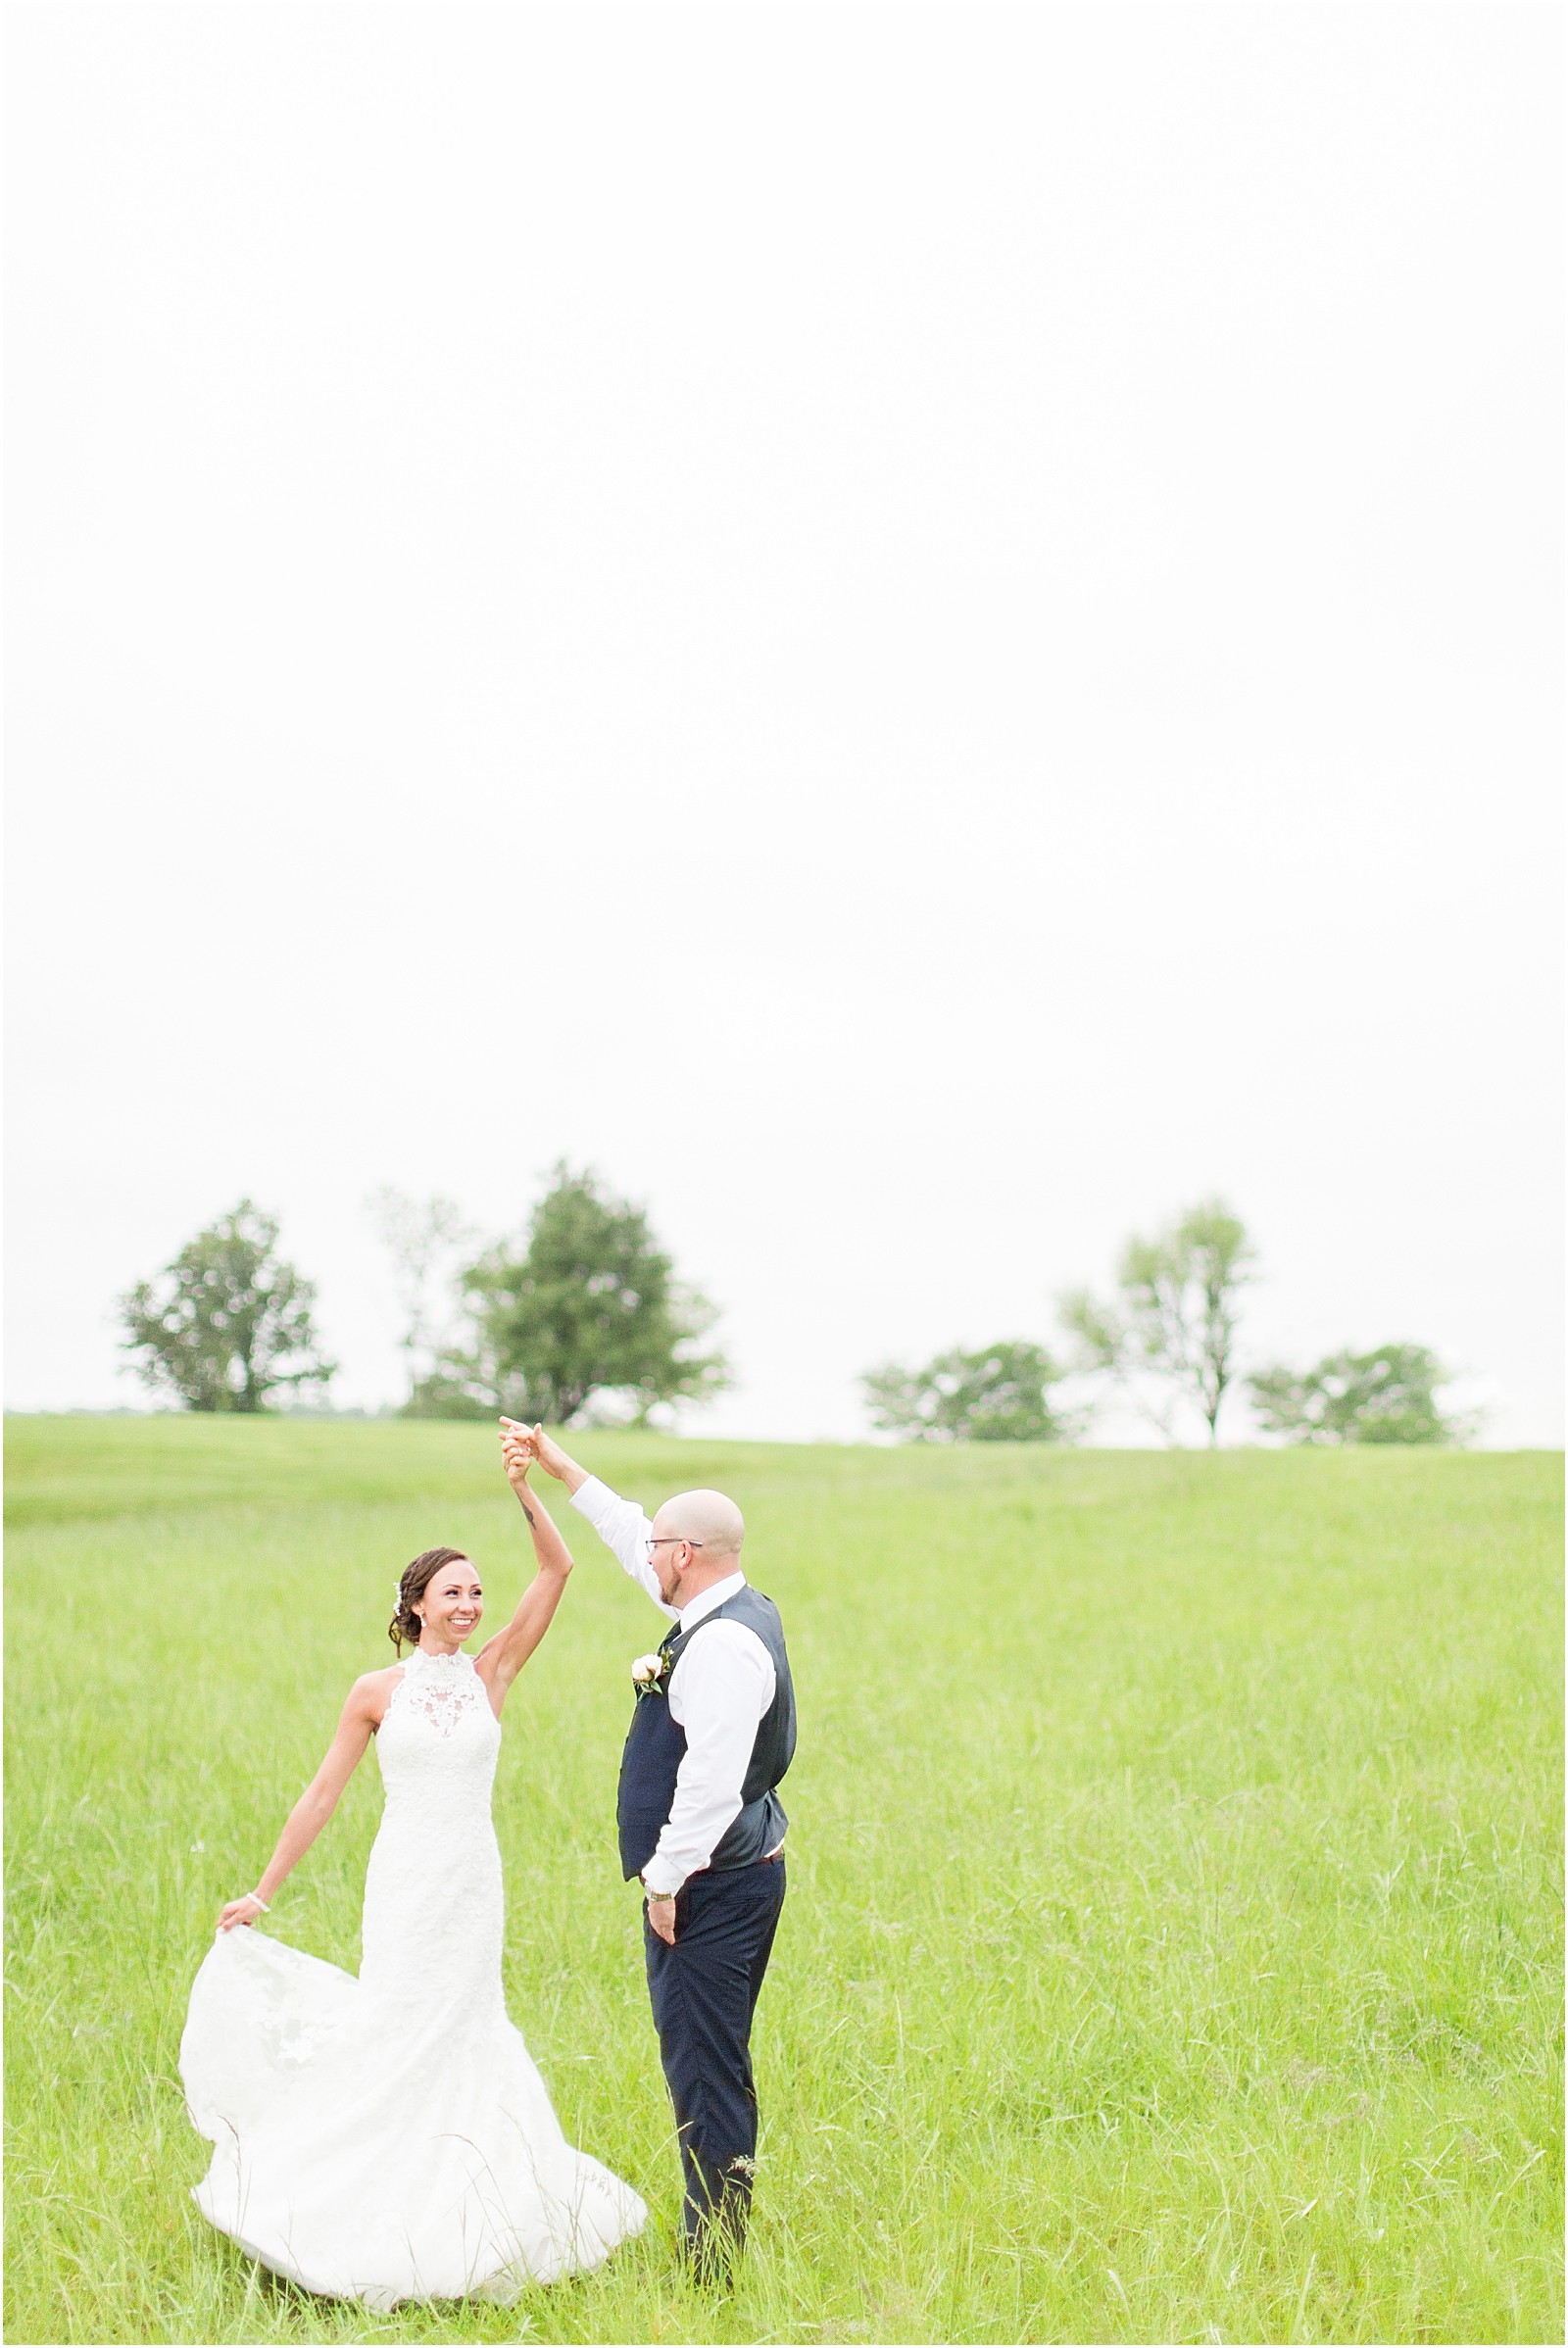 The Corner House Bed and Breakfast Wedding | Meagan and Michael131.jpg